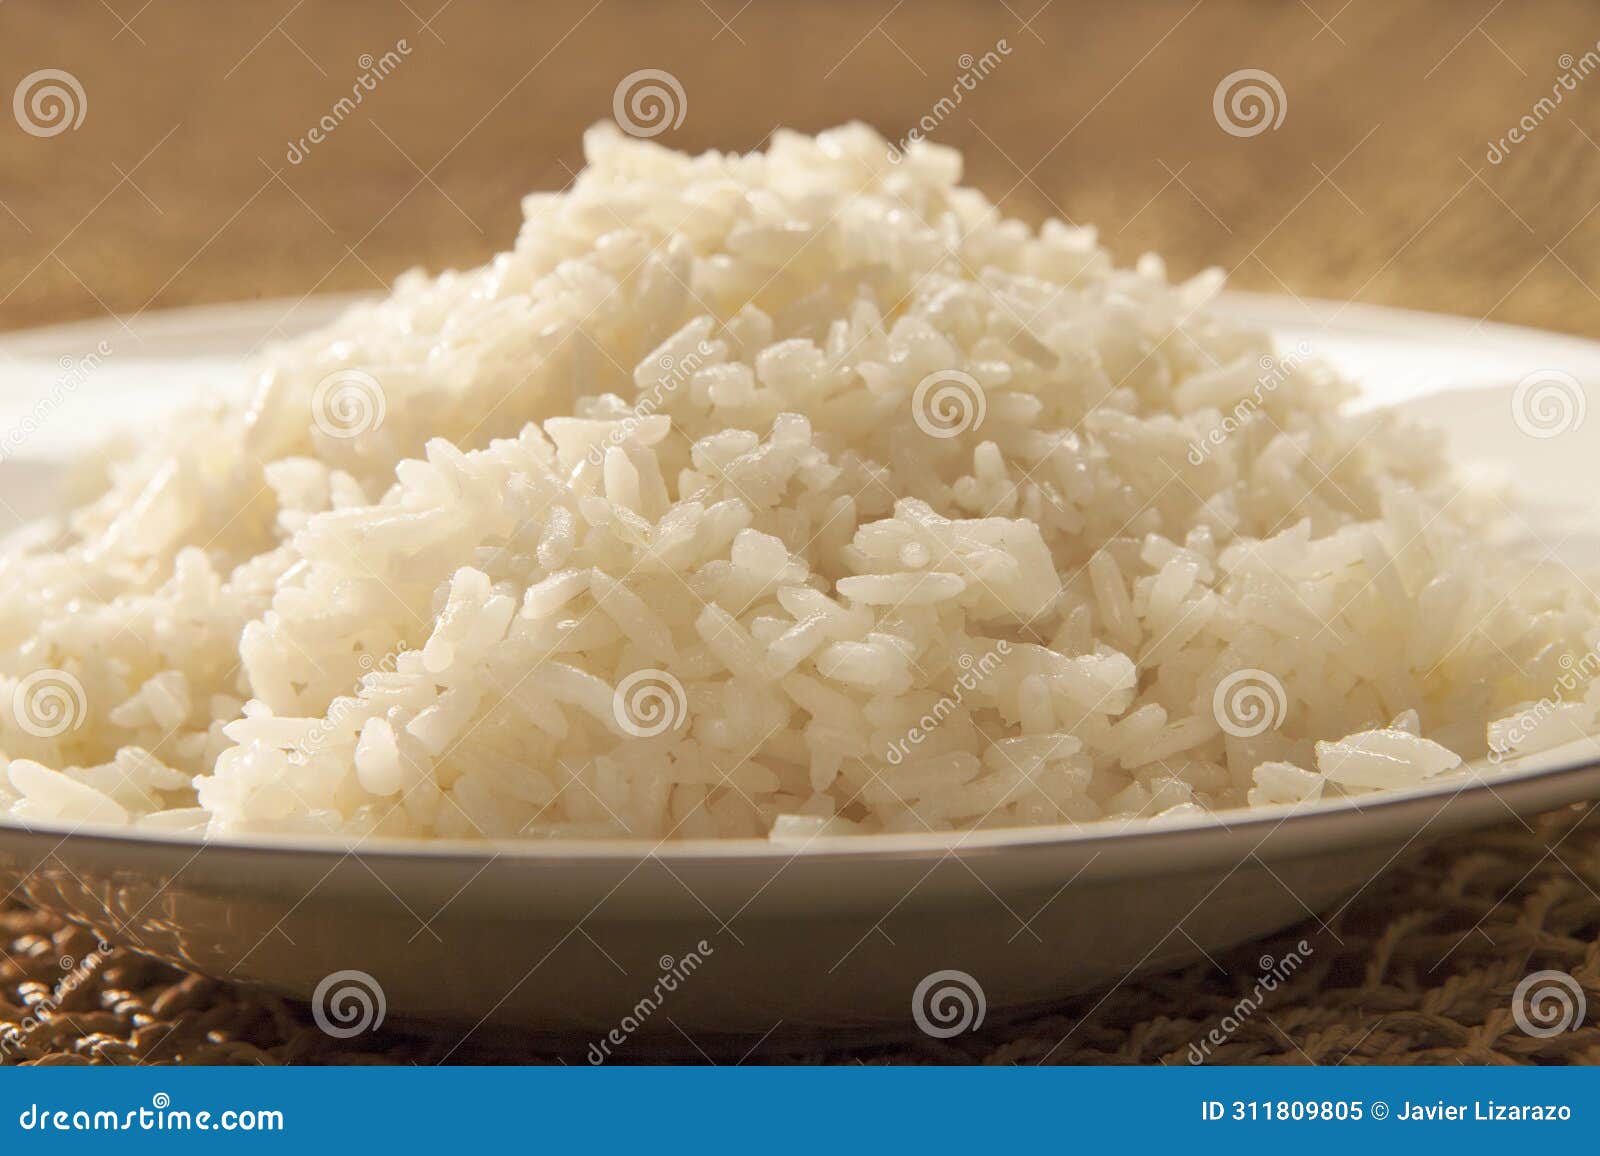 typical colombian white rice dish close up